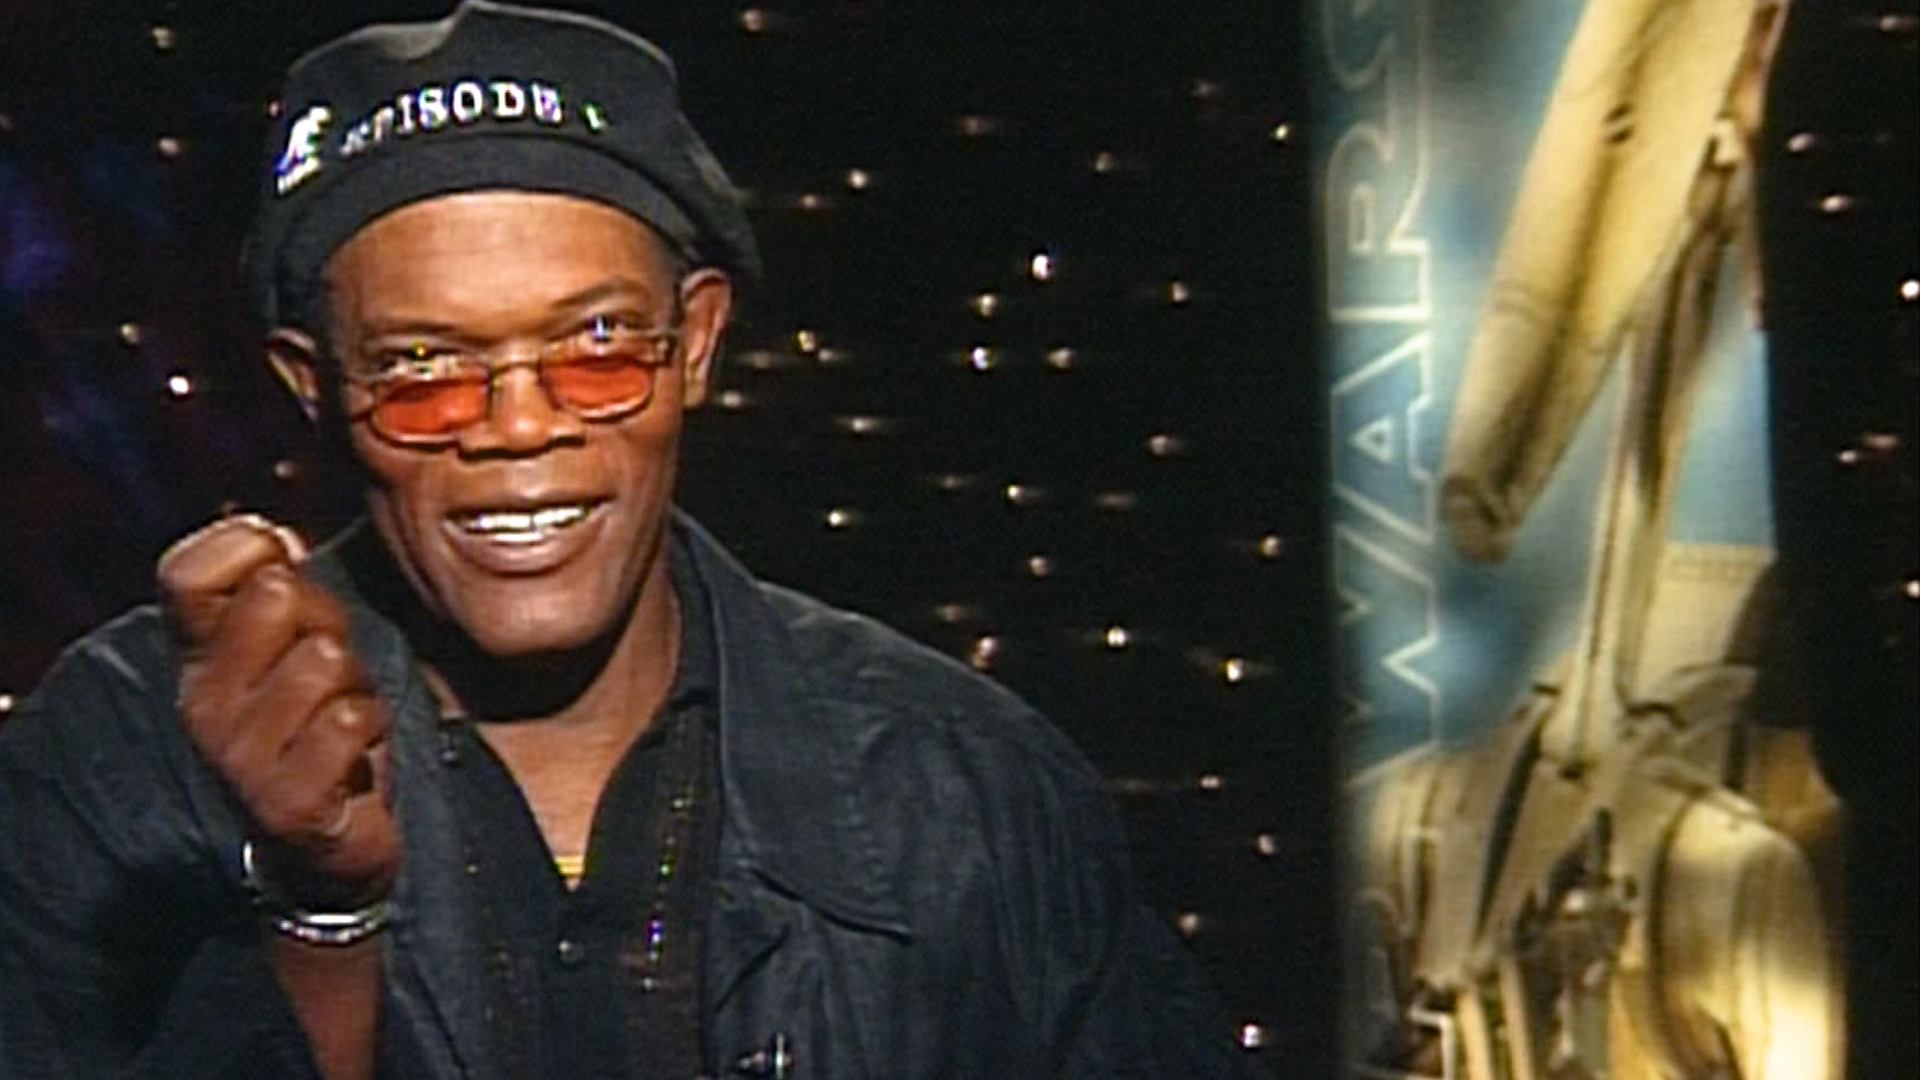 Samuel L. Jackson sat down with WFAA to talk about taking on the role of Mace Windu in the 1999 film Star Wars: Episode I - The Phantom Menace.